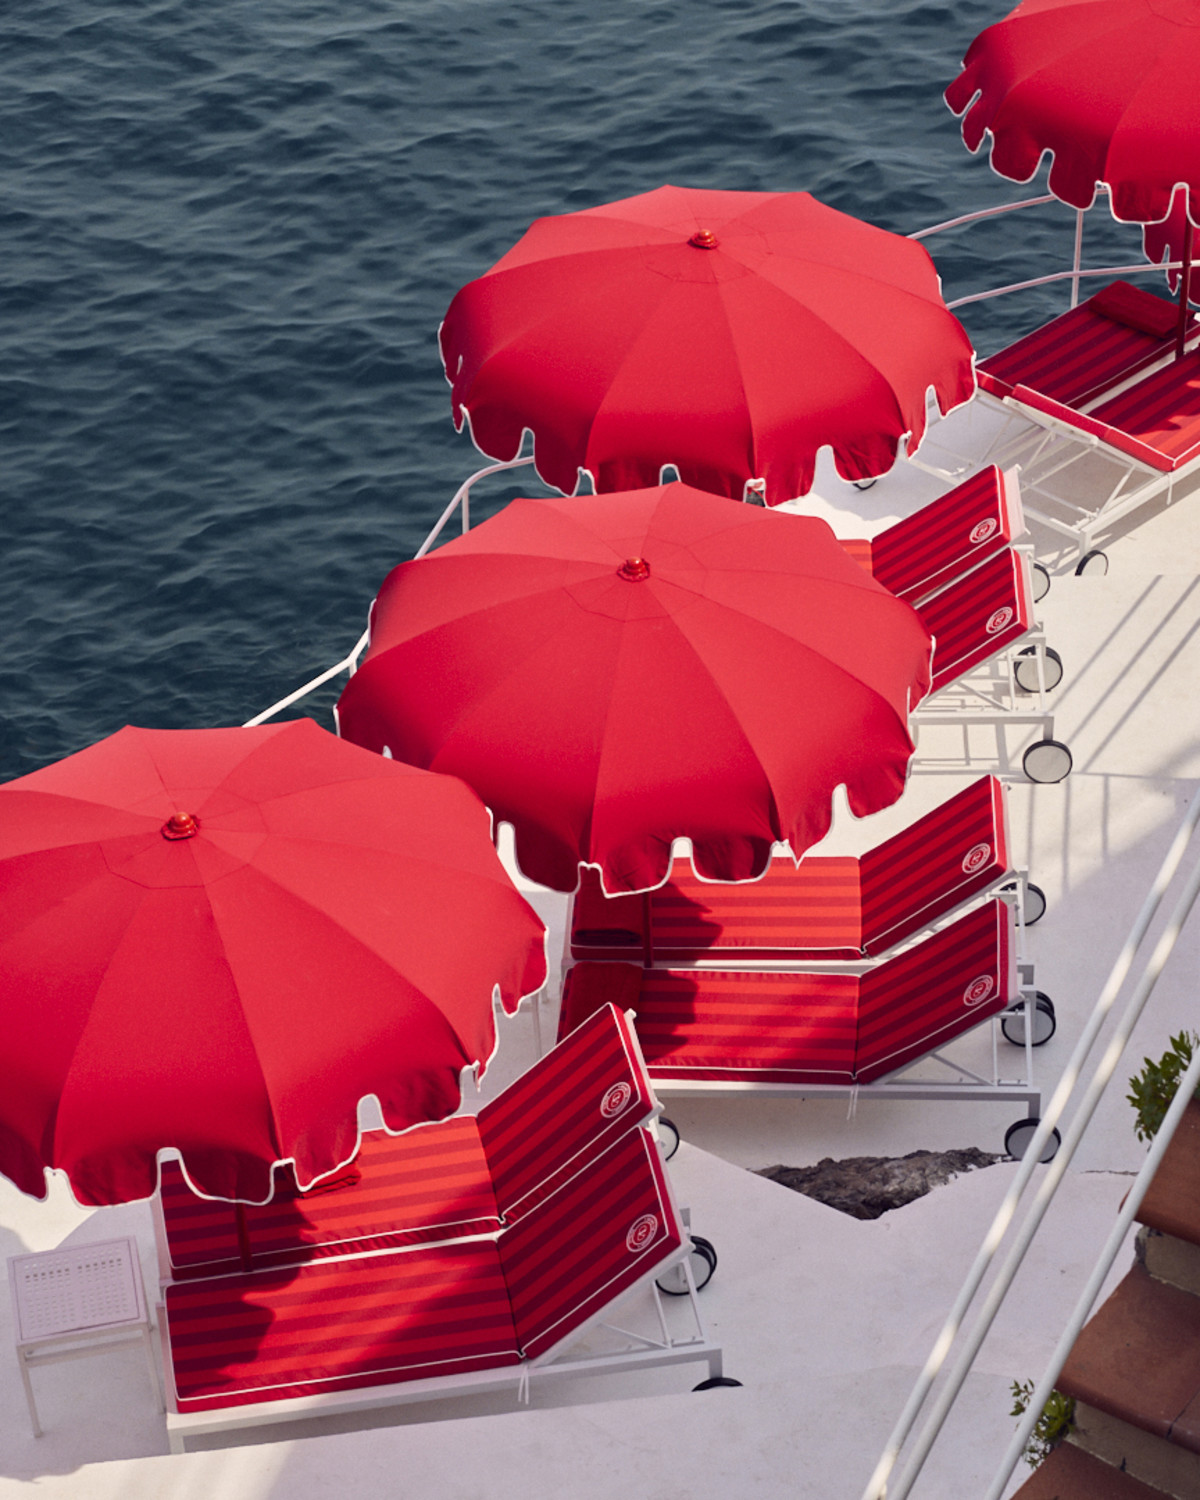 aerial view of red lounge chairs and red umbrellas overlooking the sea